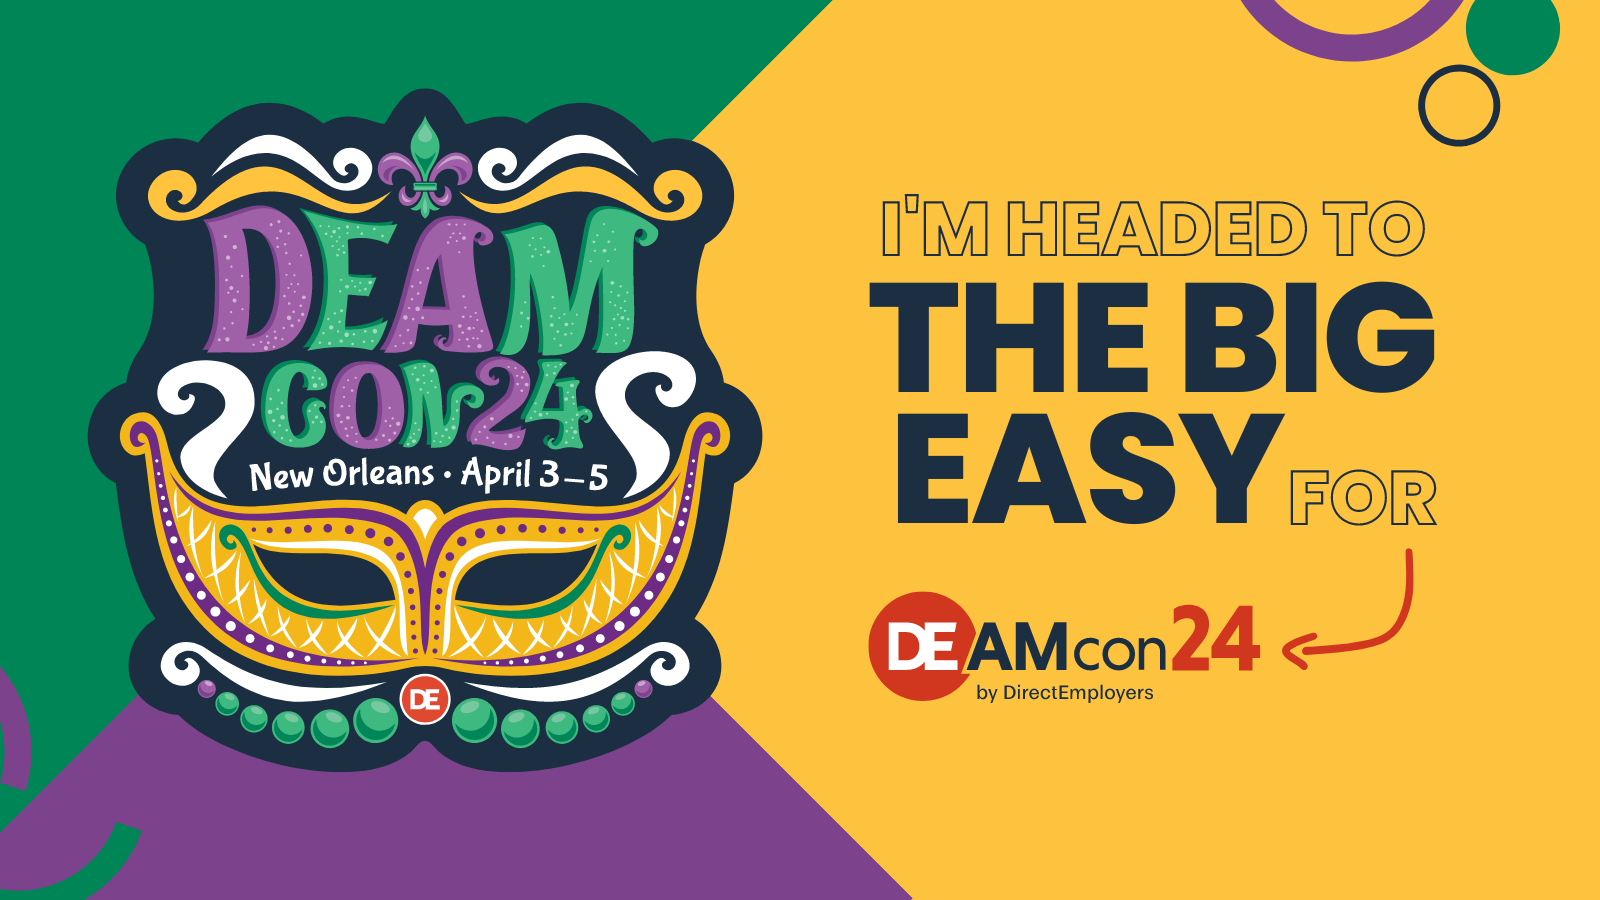 I'm headed to the Big Easy for DEAMcon24